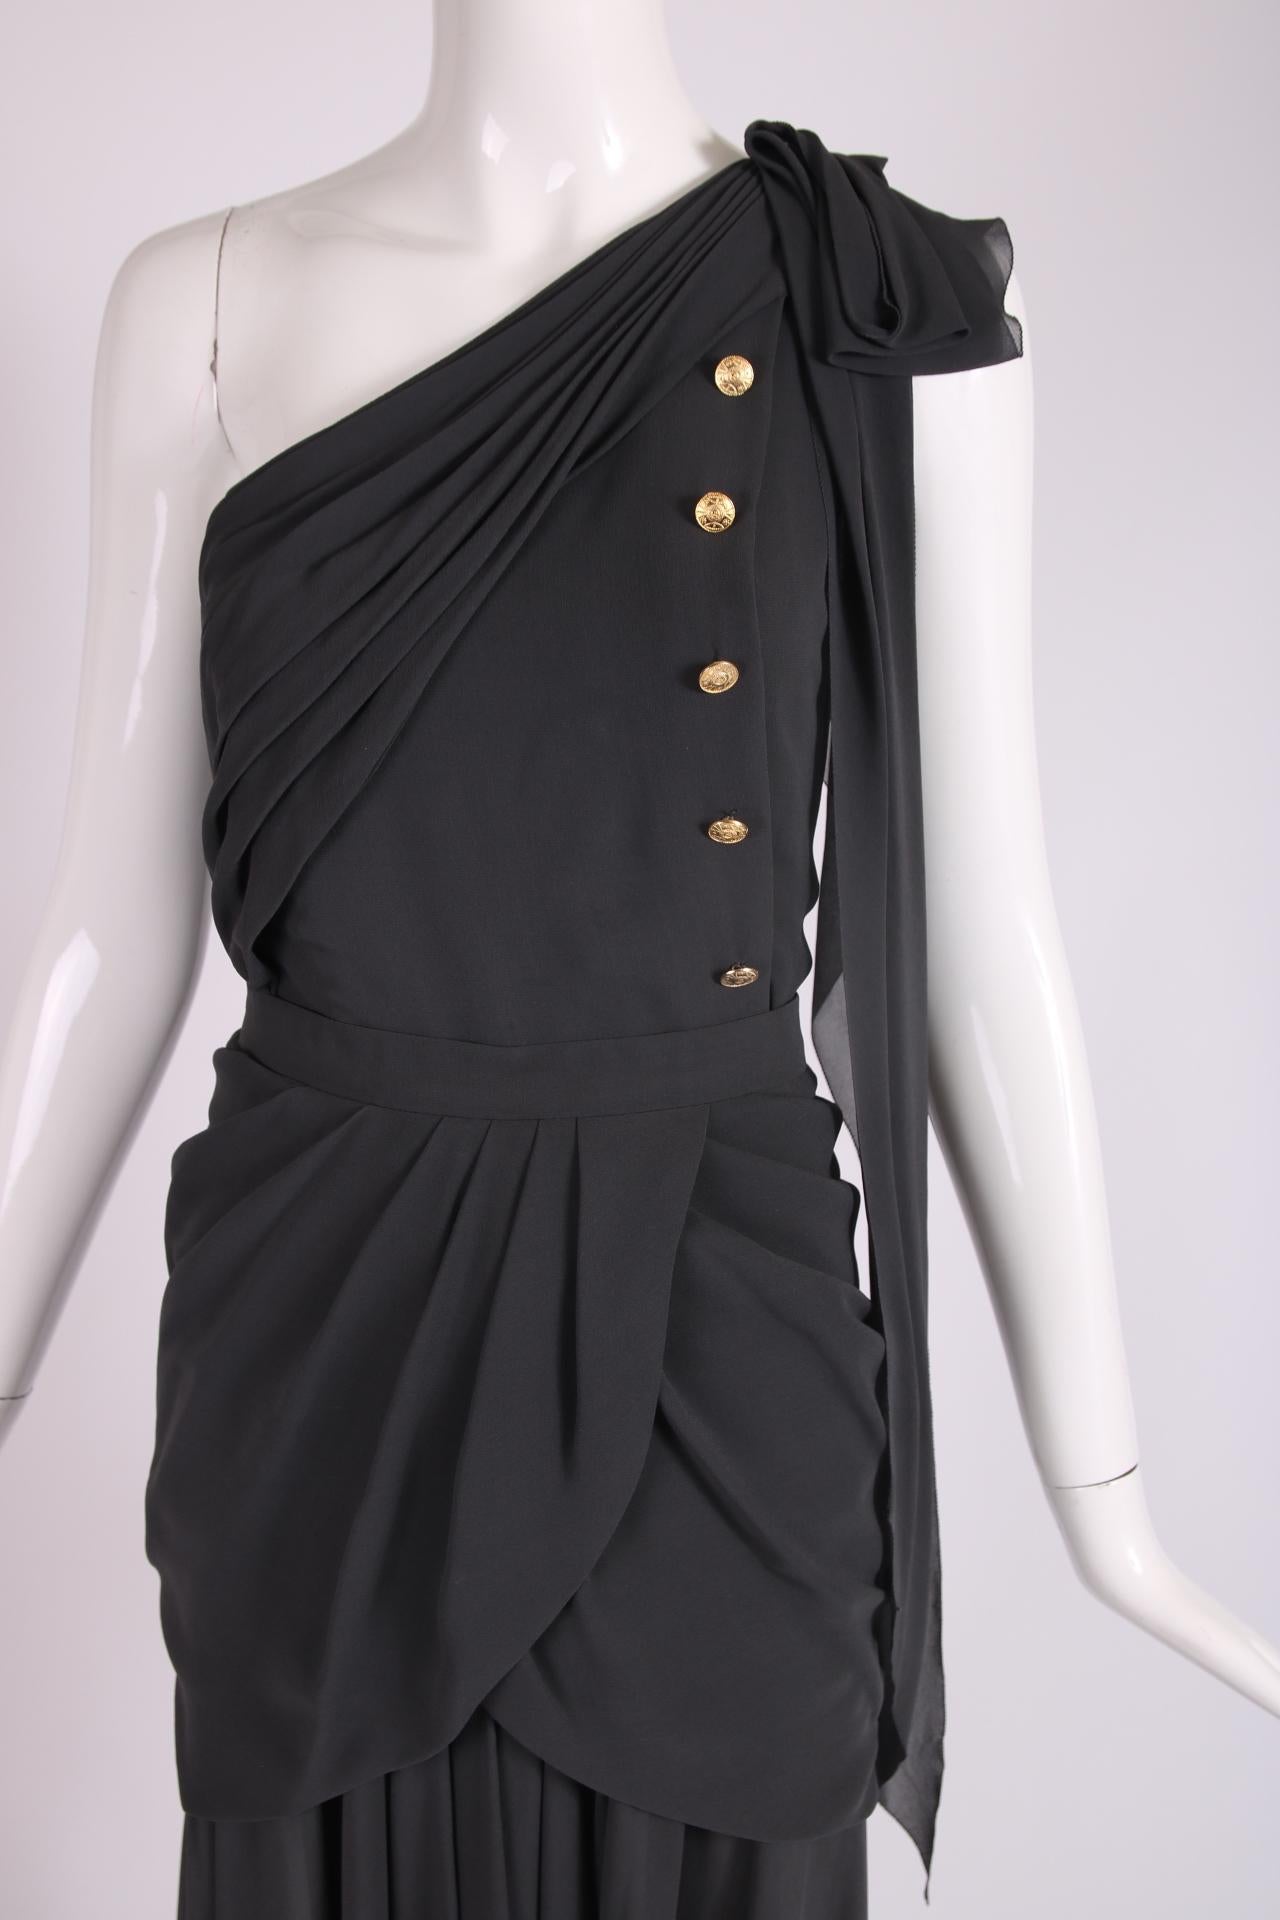 1989 Chanel Grecian-Inspired Silk Evening Ensemble For Sale 1